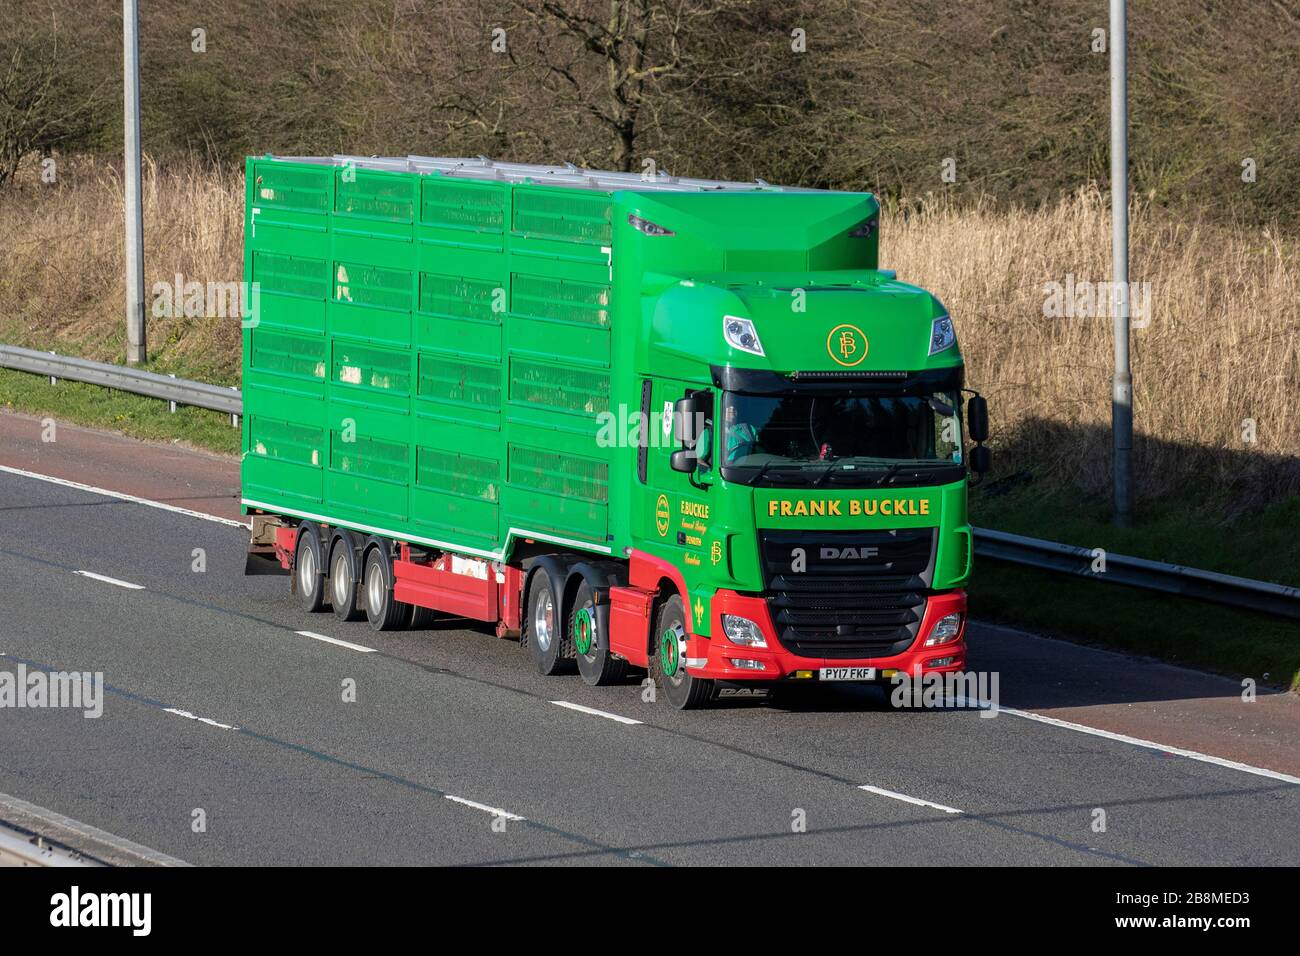 Frank Buckle Haulage delivery trucks, green lorry, transportation, truck, cargo carrier, DAF vehicle, European commercial transport, industry, M61 at Manchester, UK Stock Photo